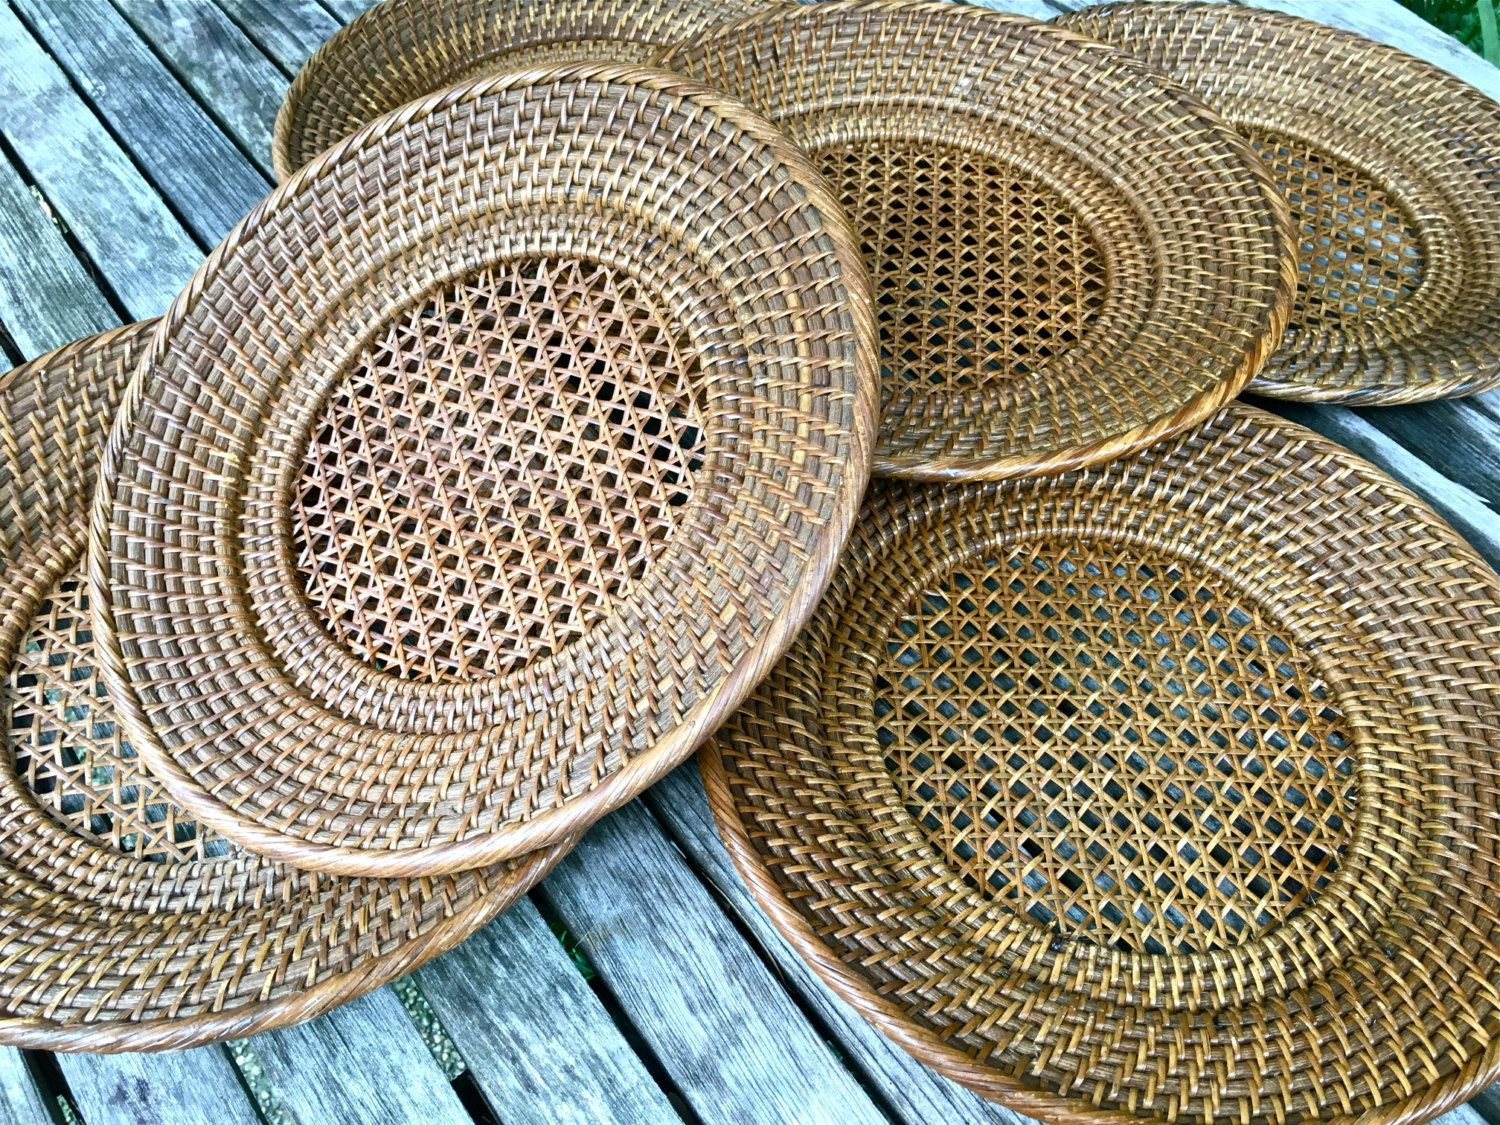 13 Perfect Hoosier Glass Vase 4063 B 2022 free download hoosier glass vase 4063 b of vintage woven wicker rattan plates chargers trays table setting inside vintage woven wicker rattan plates chargers trays table setting table decor set of six by 